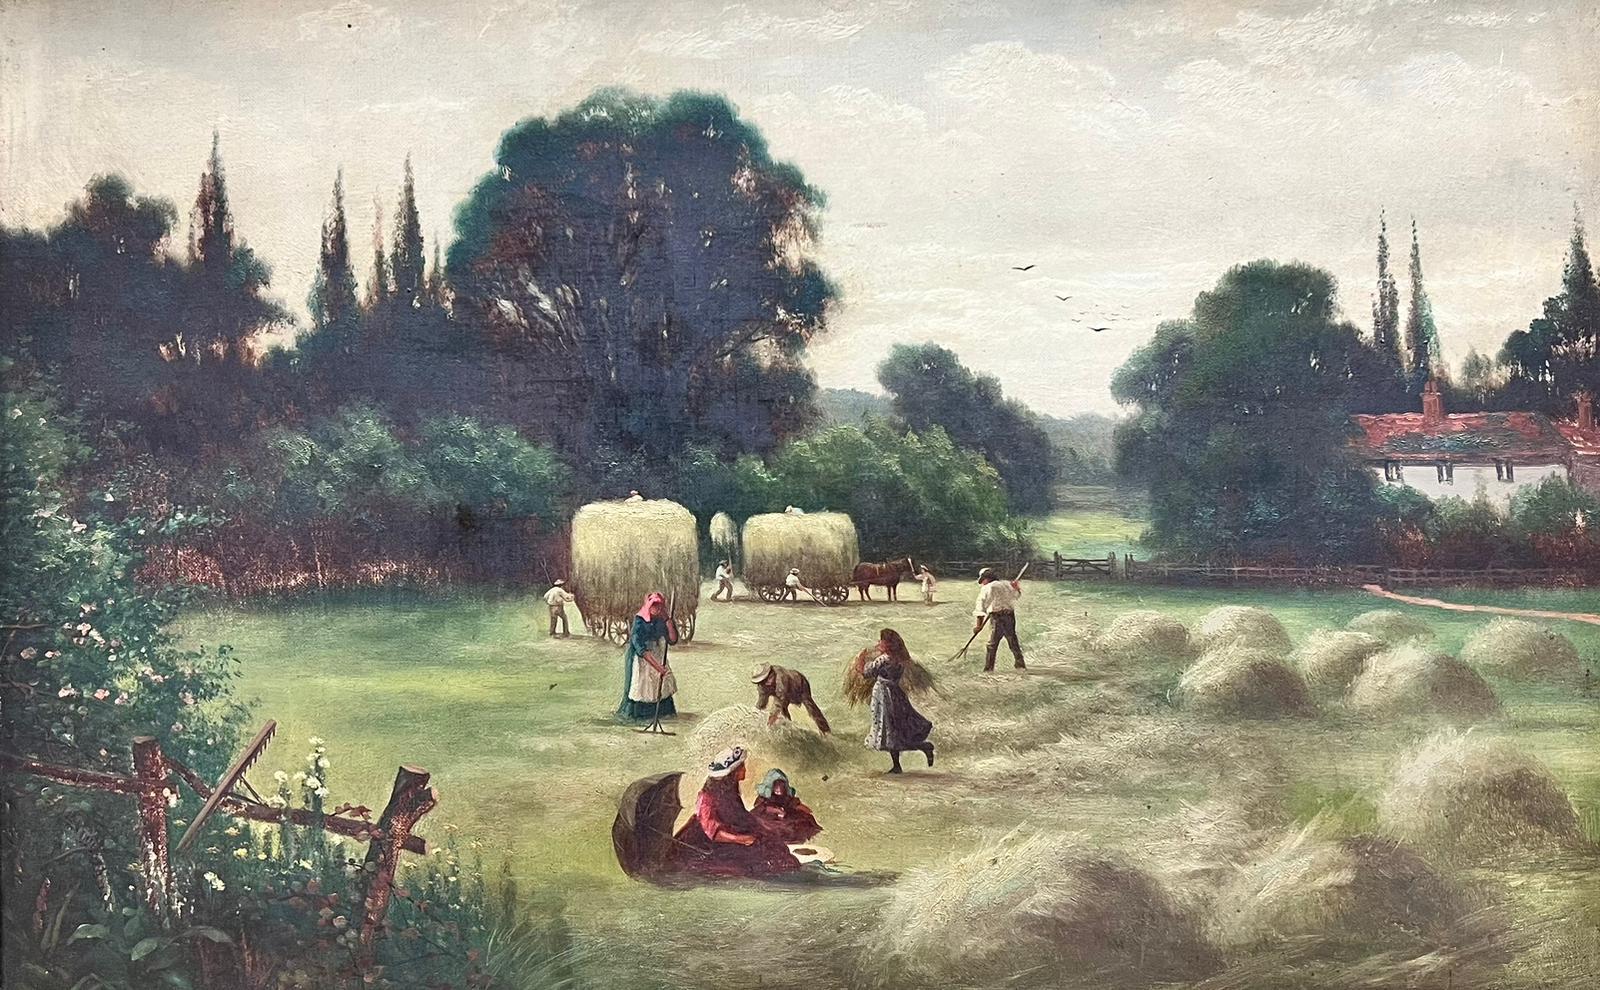 Rural Harvest Scene Gathering Hay Farming Landscape 19th Century English Oil - Painting by Victorian English